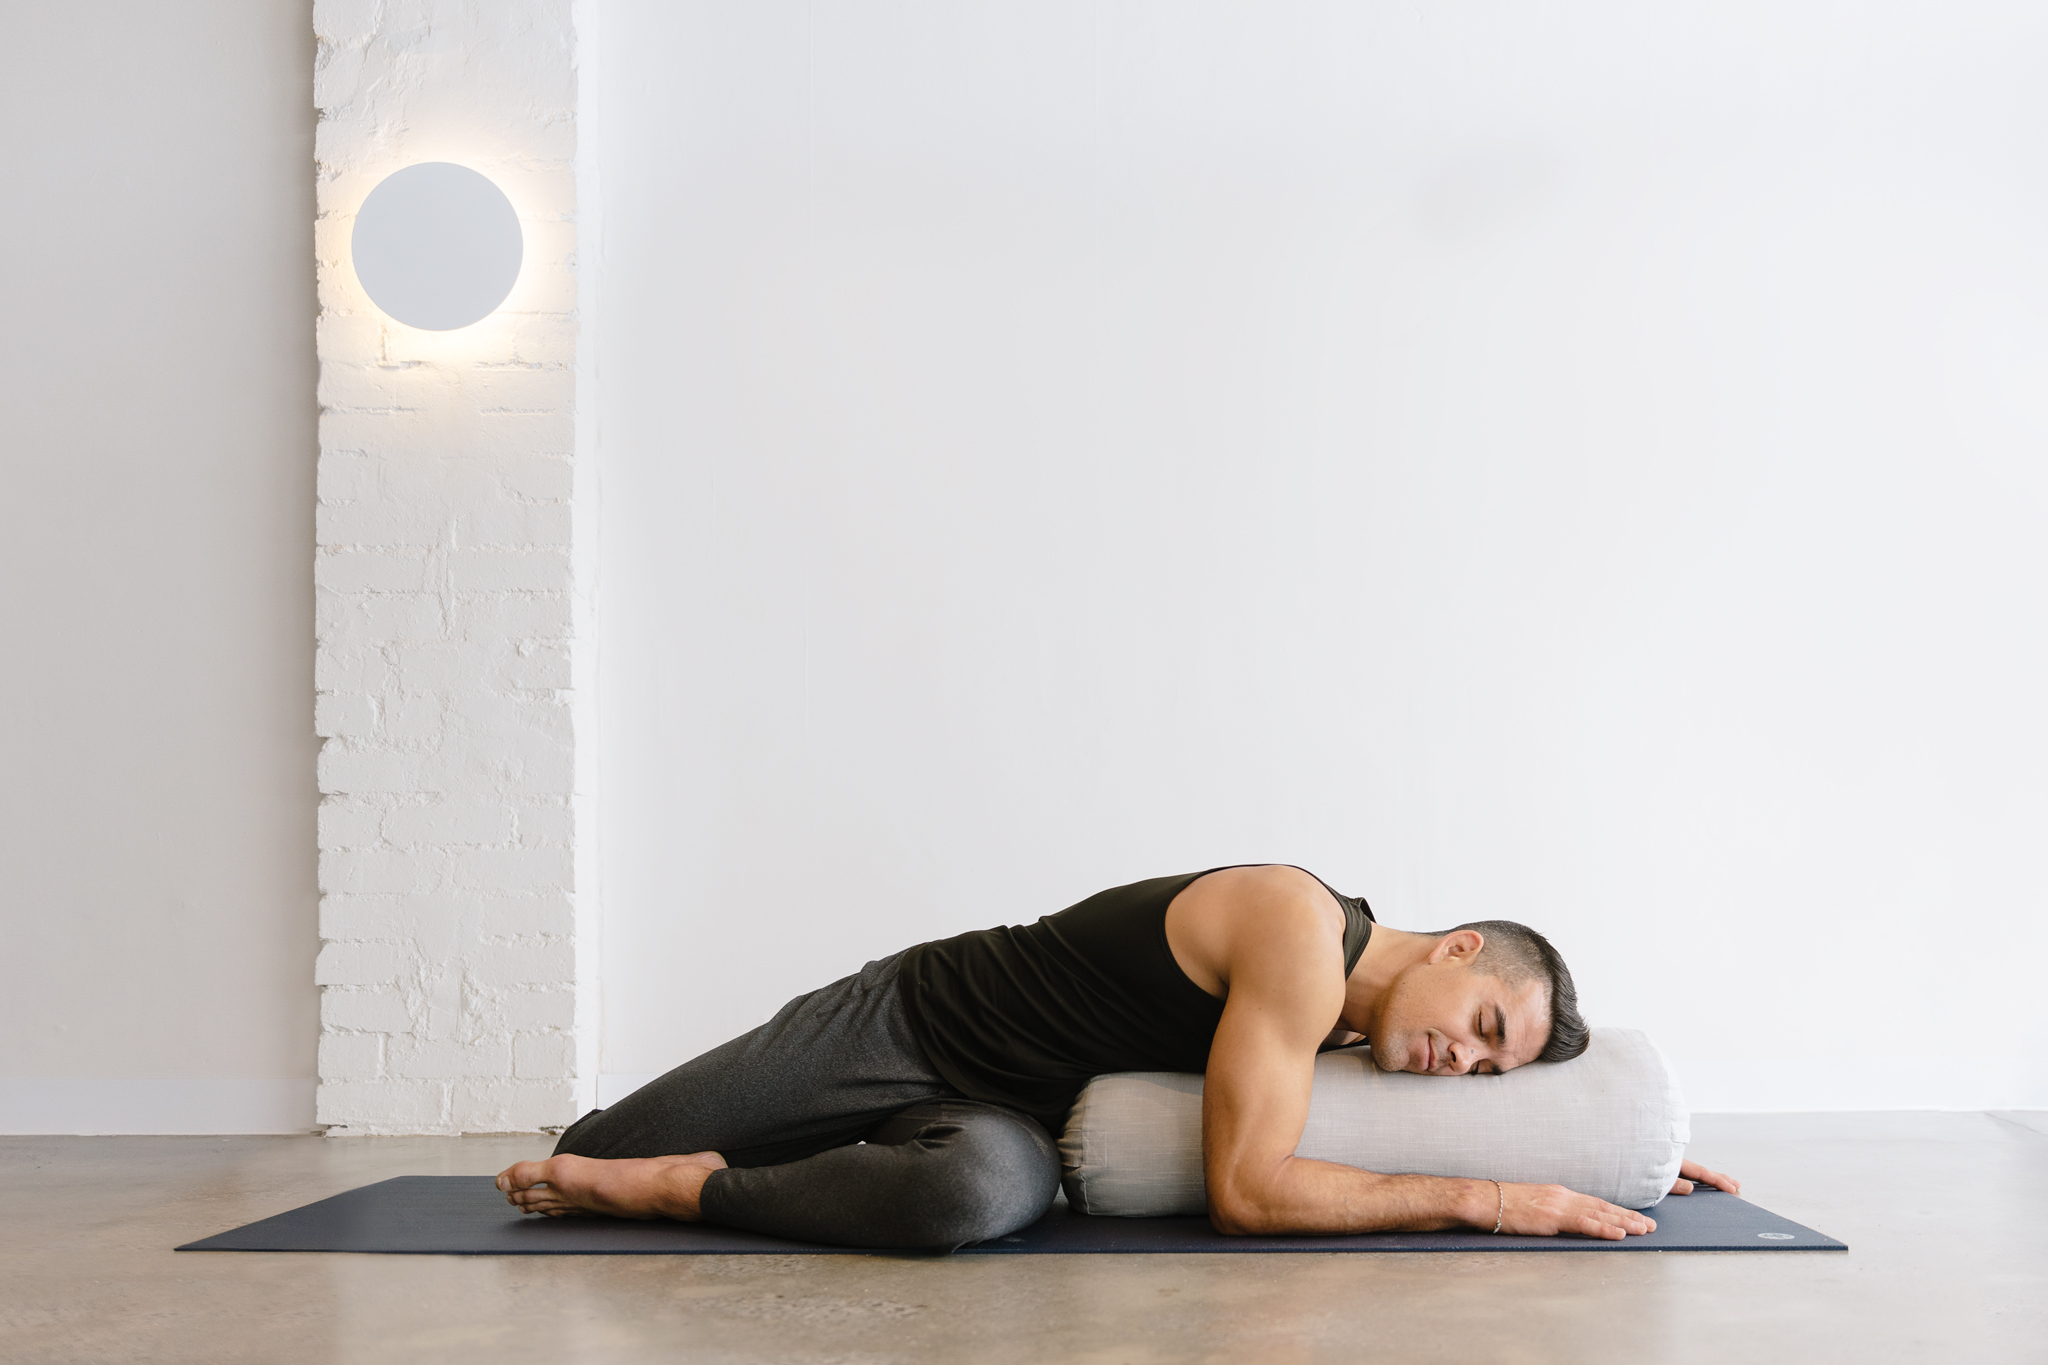 Yoga teacher Dustin Brown in a yin posture on a bolster at warrior one yoga studio in Mordialloc